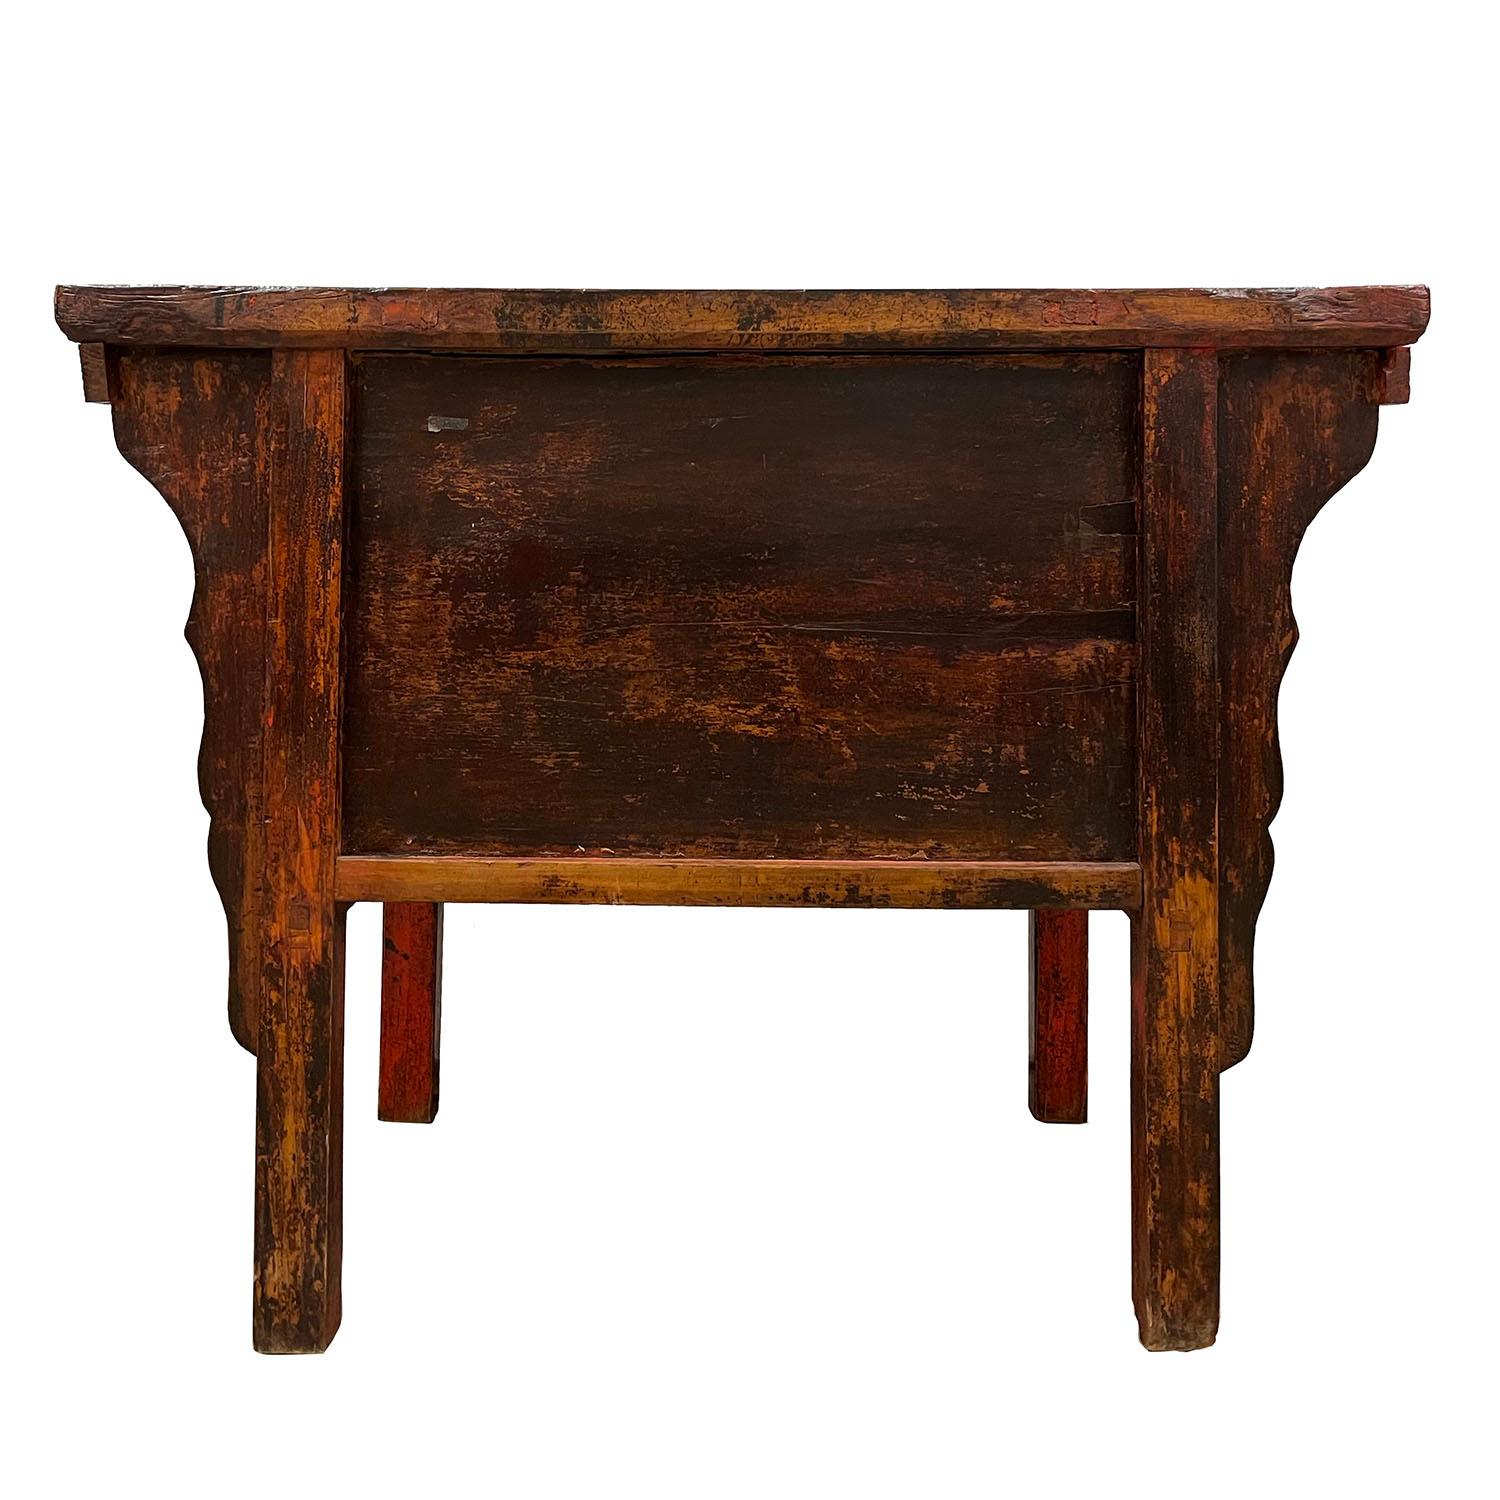 19th Century Antique Chinese Carved Red Lacquer Console Table / Sideboard For Sale 3